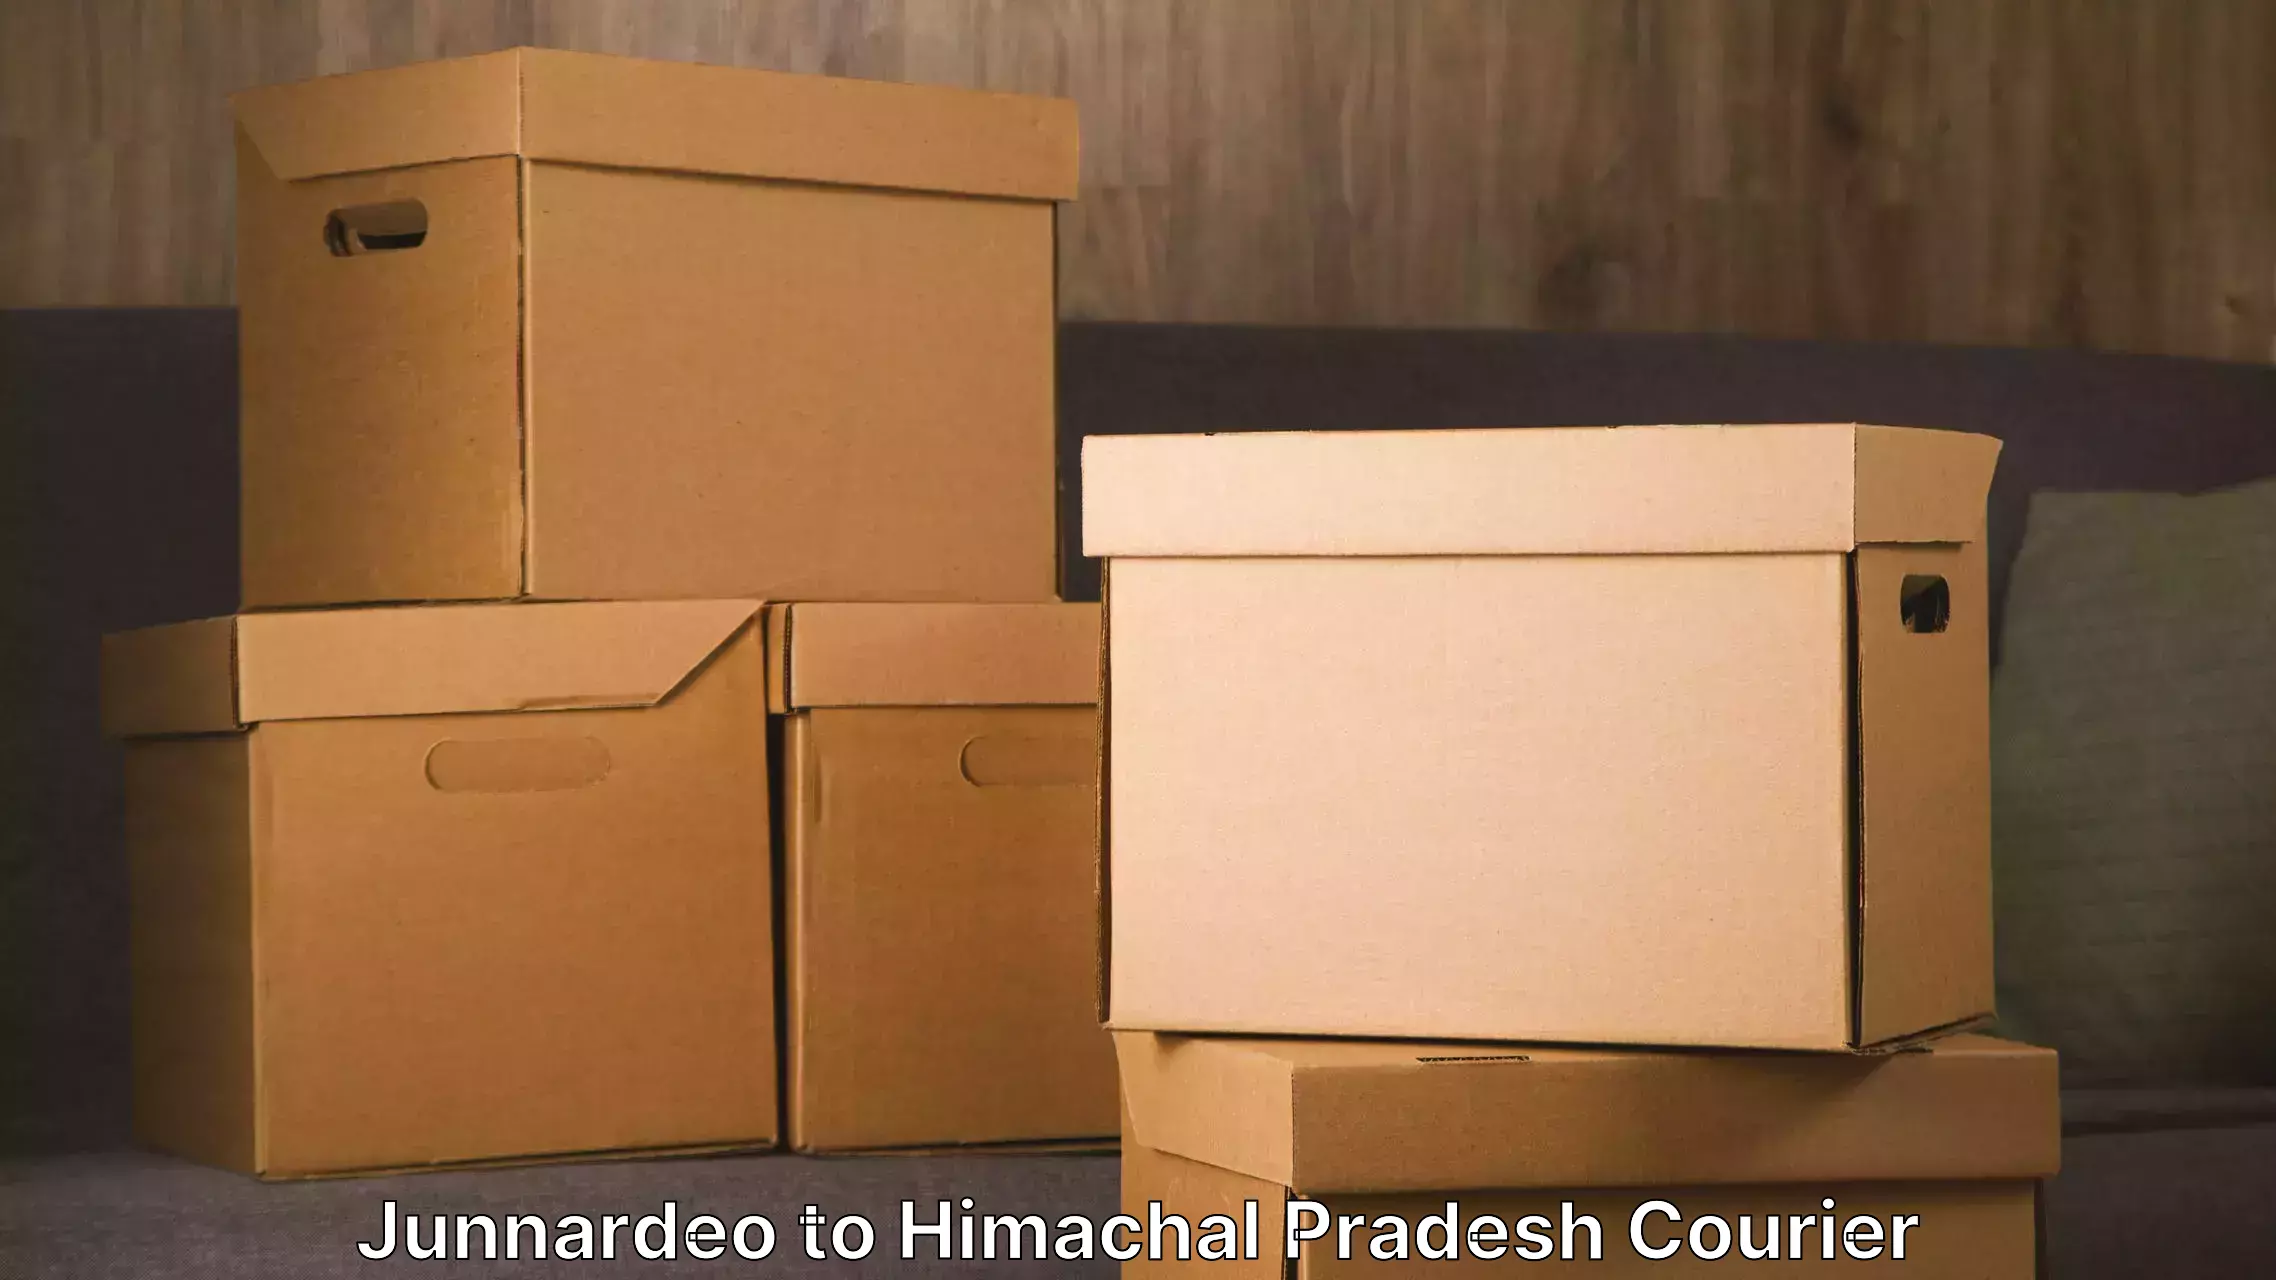 Reliable relocation services Junnardeo to Jahu